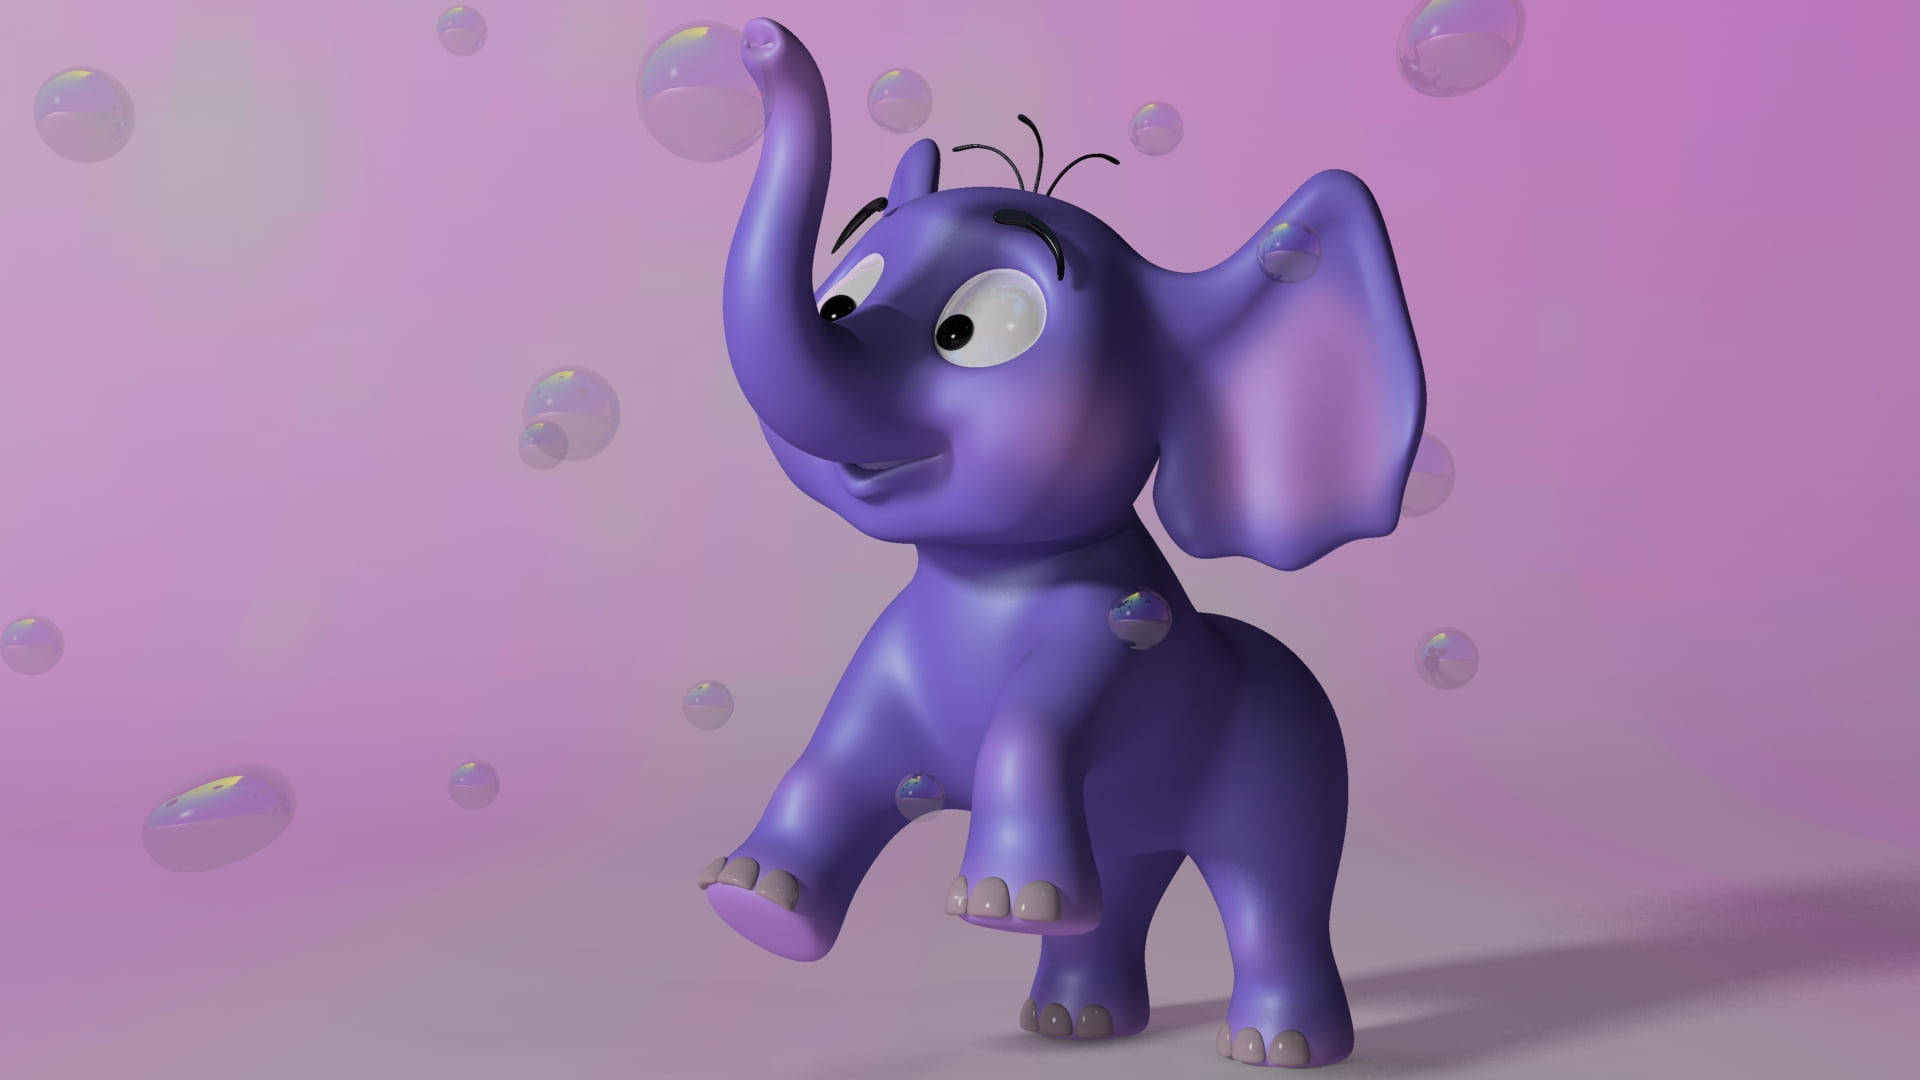 Adorable 3d Purple Elephant On Android Phone Wallpaper